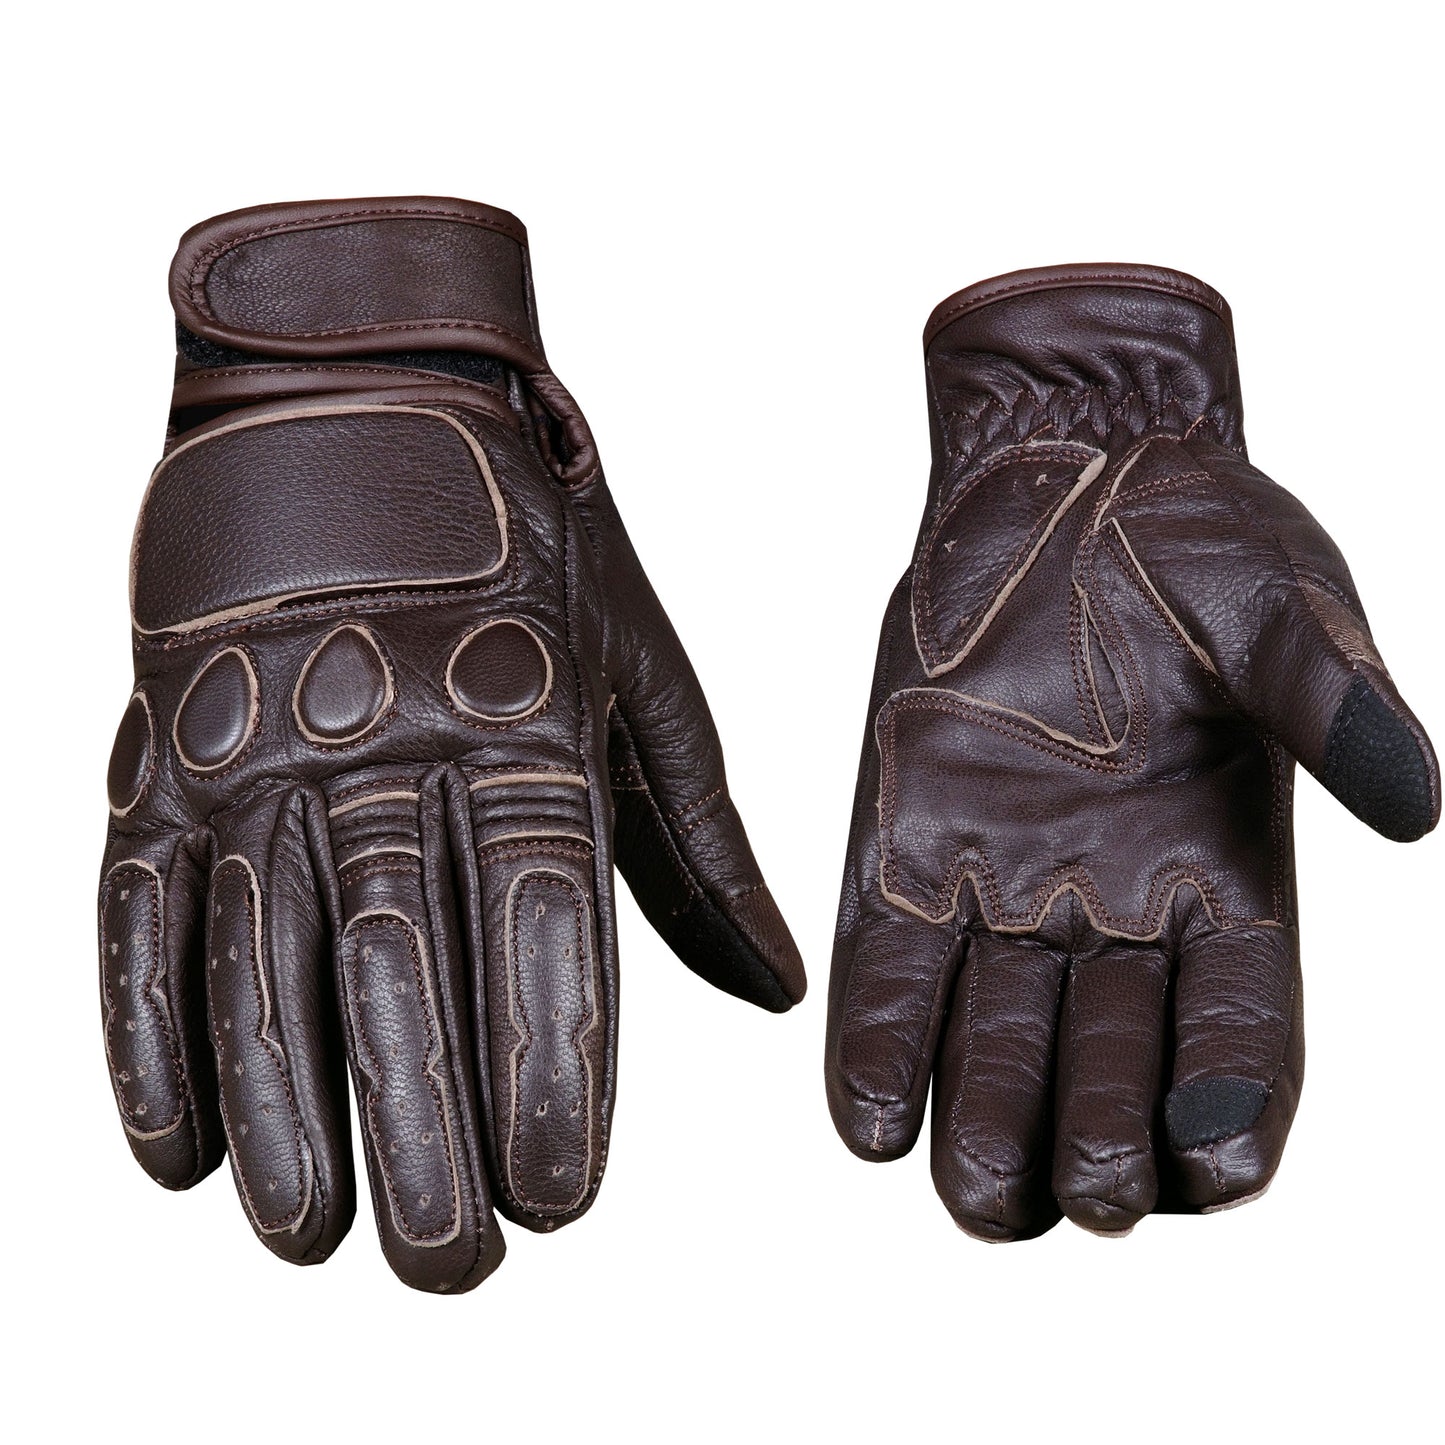 New Vintage Mens Leather Cruiser Protective Motorcycle Riding Racing Gloves Brown